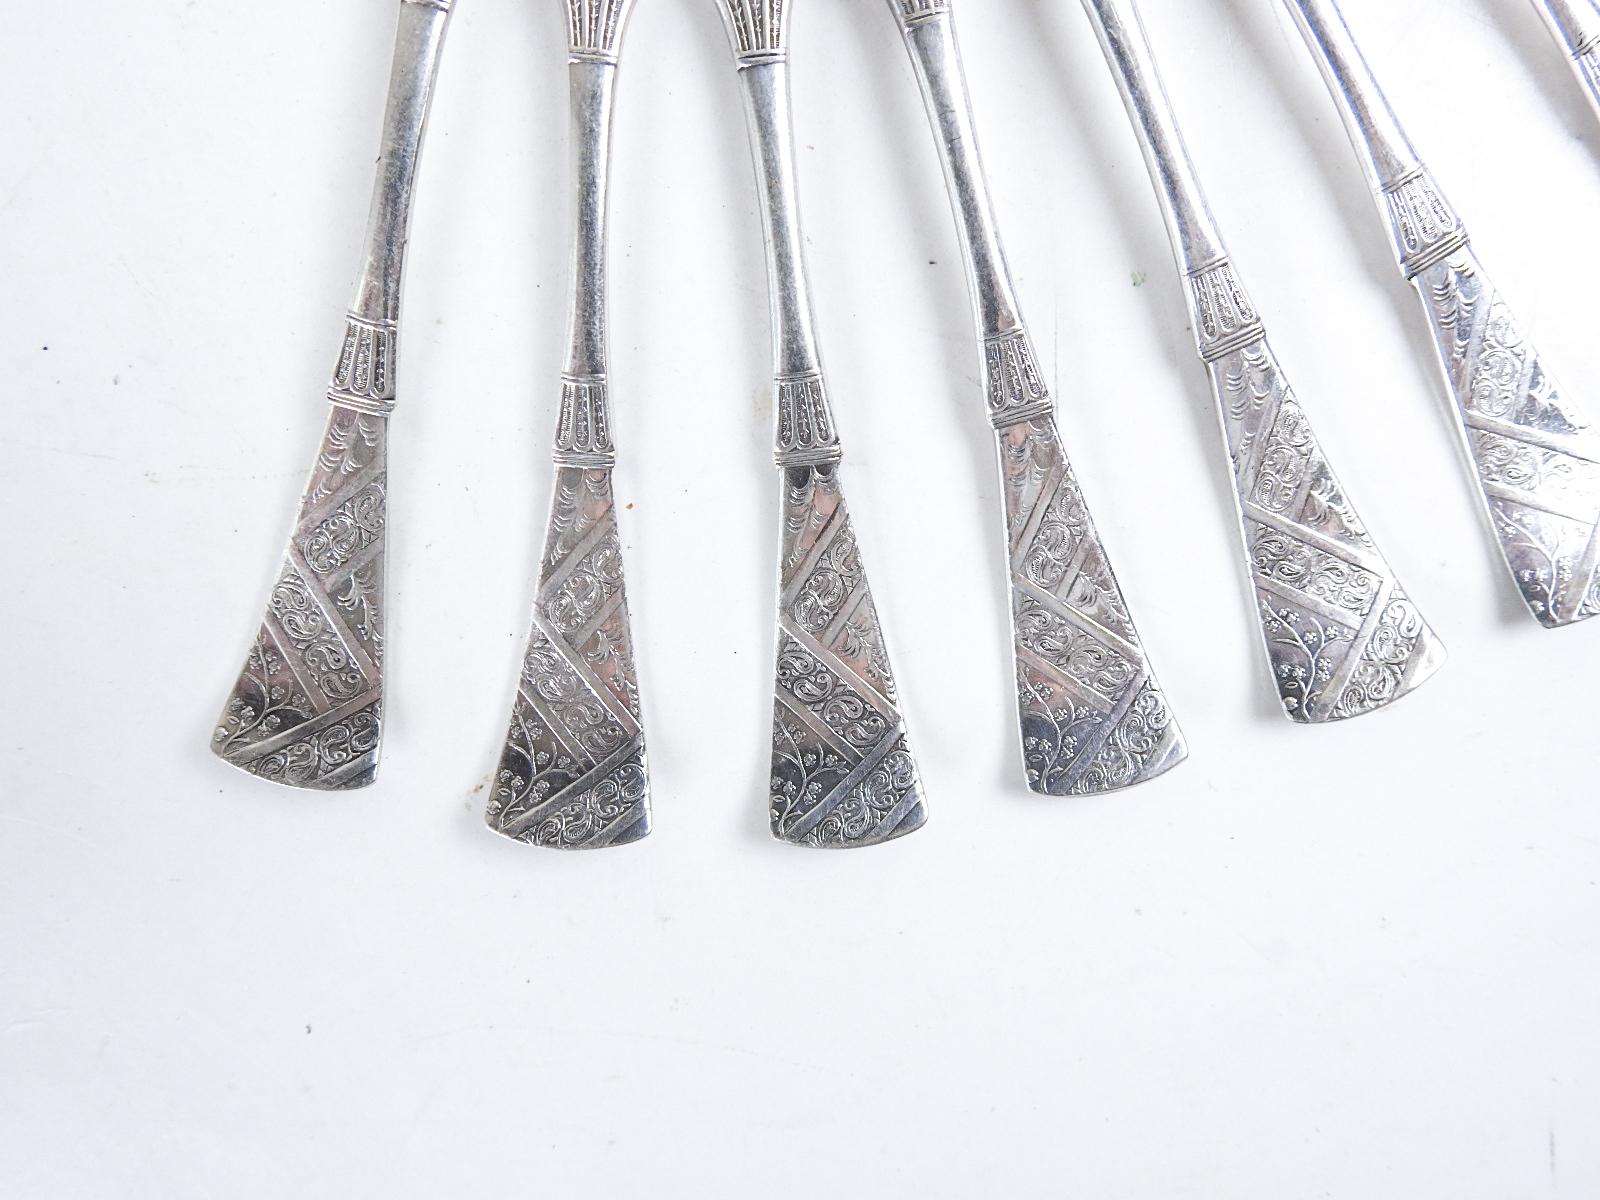 Silver Plate Antique 1860s Silverplate Aesthetic Movement Nut Cheese Picks - Set of 8 For Sale